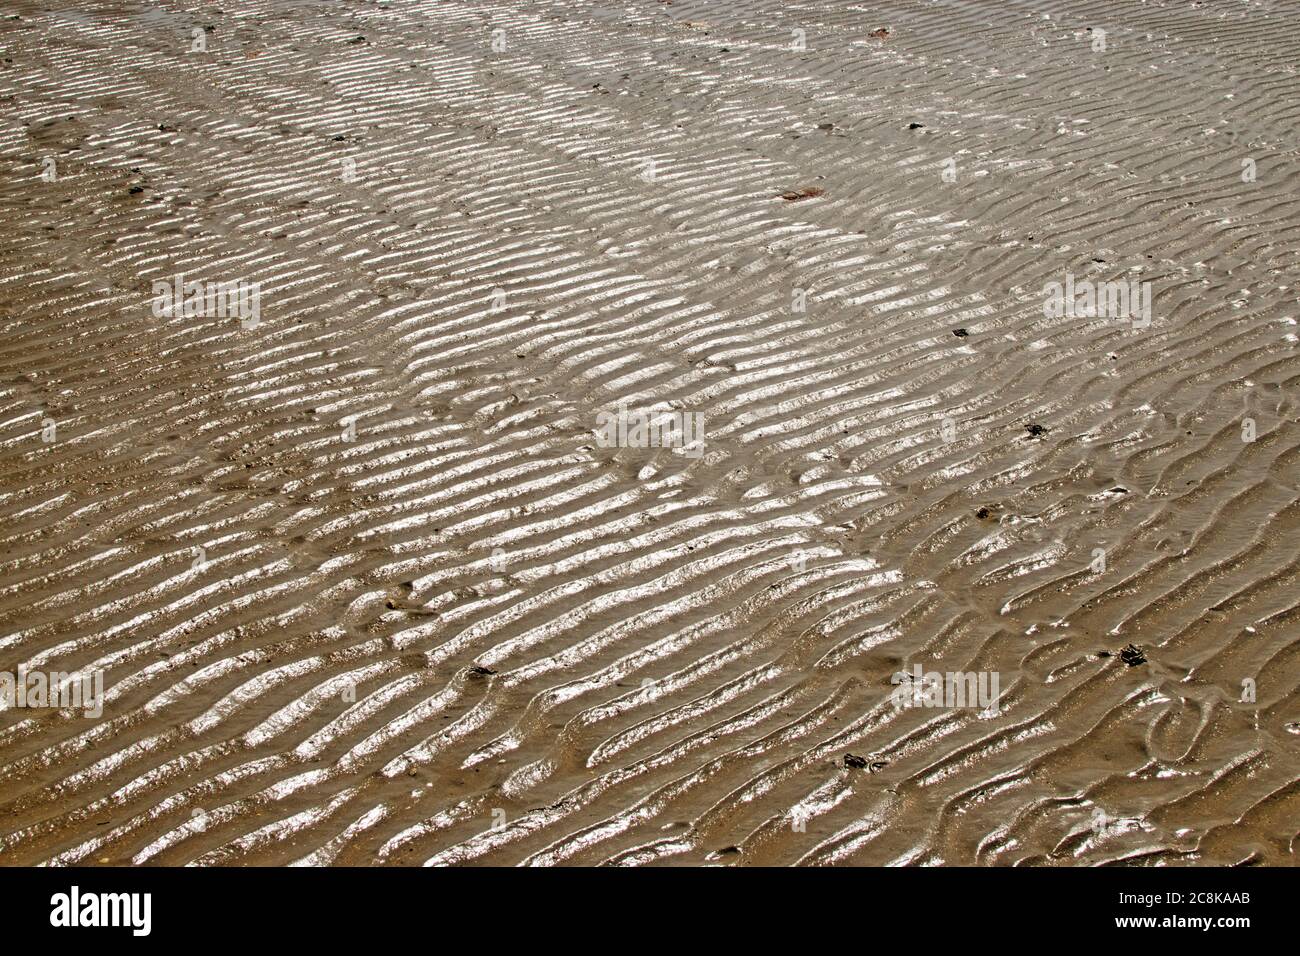 Beach Textures/Riples in the Sand Foto Stock